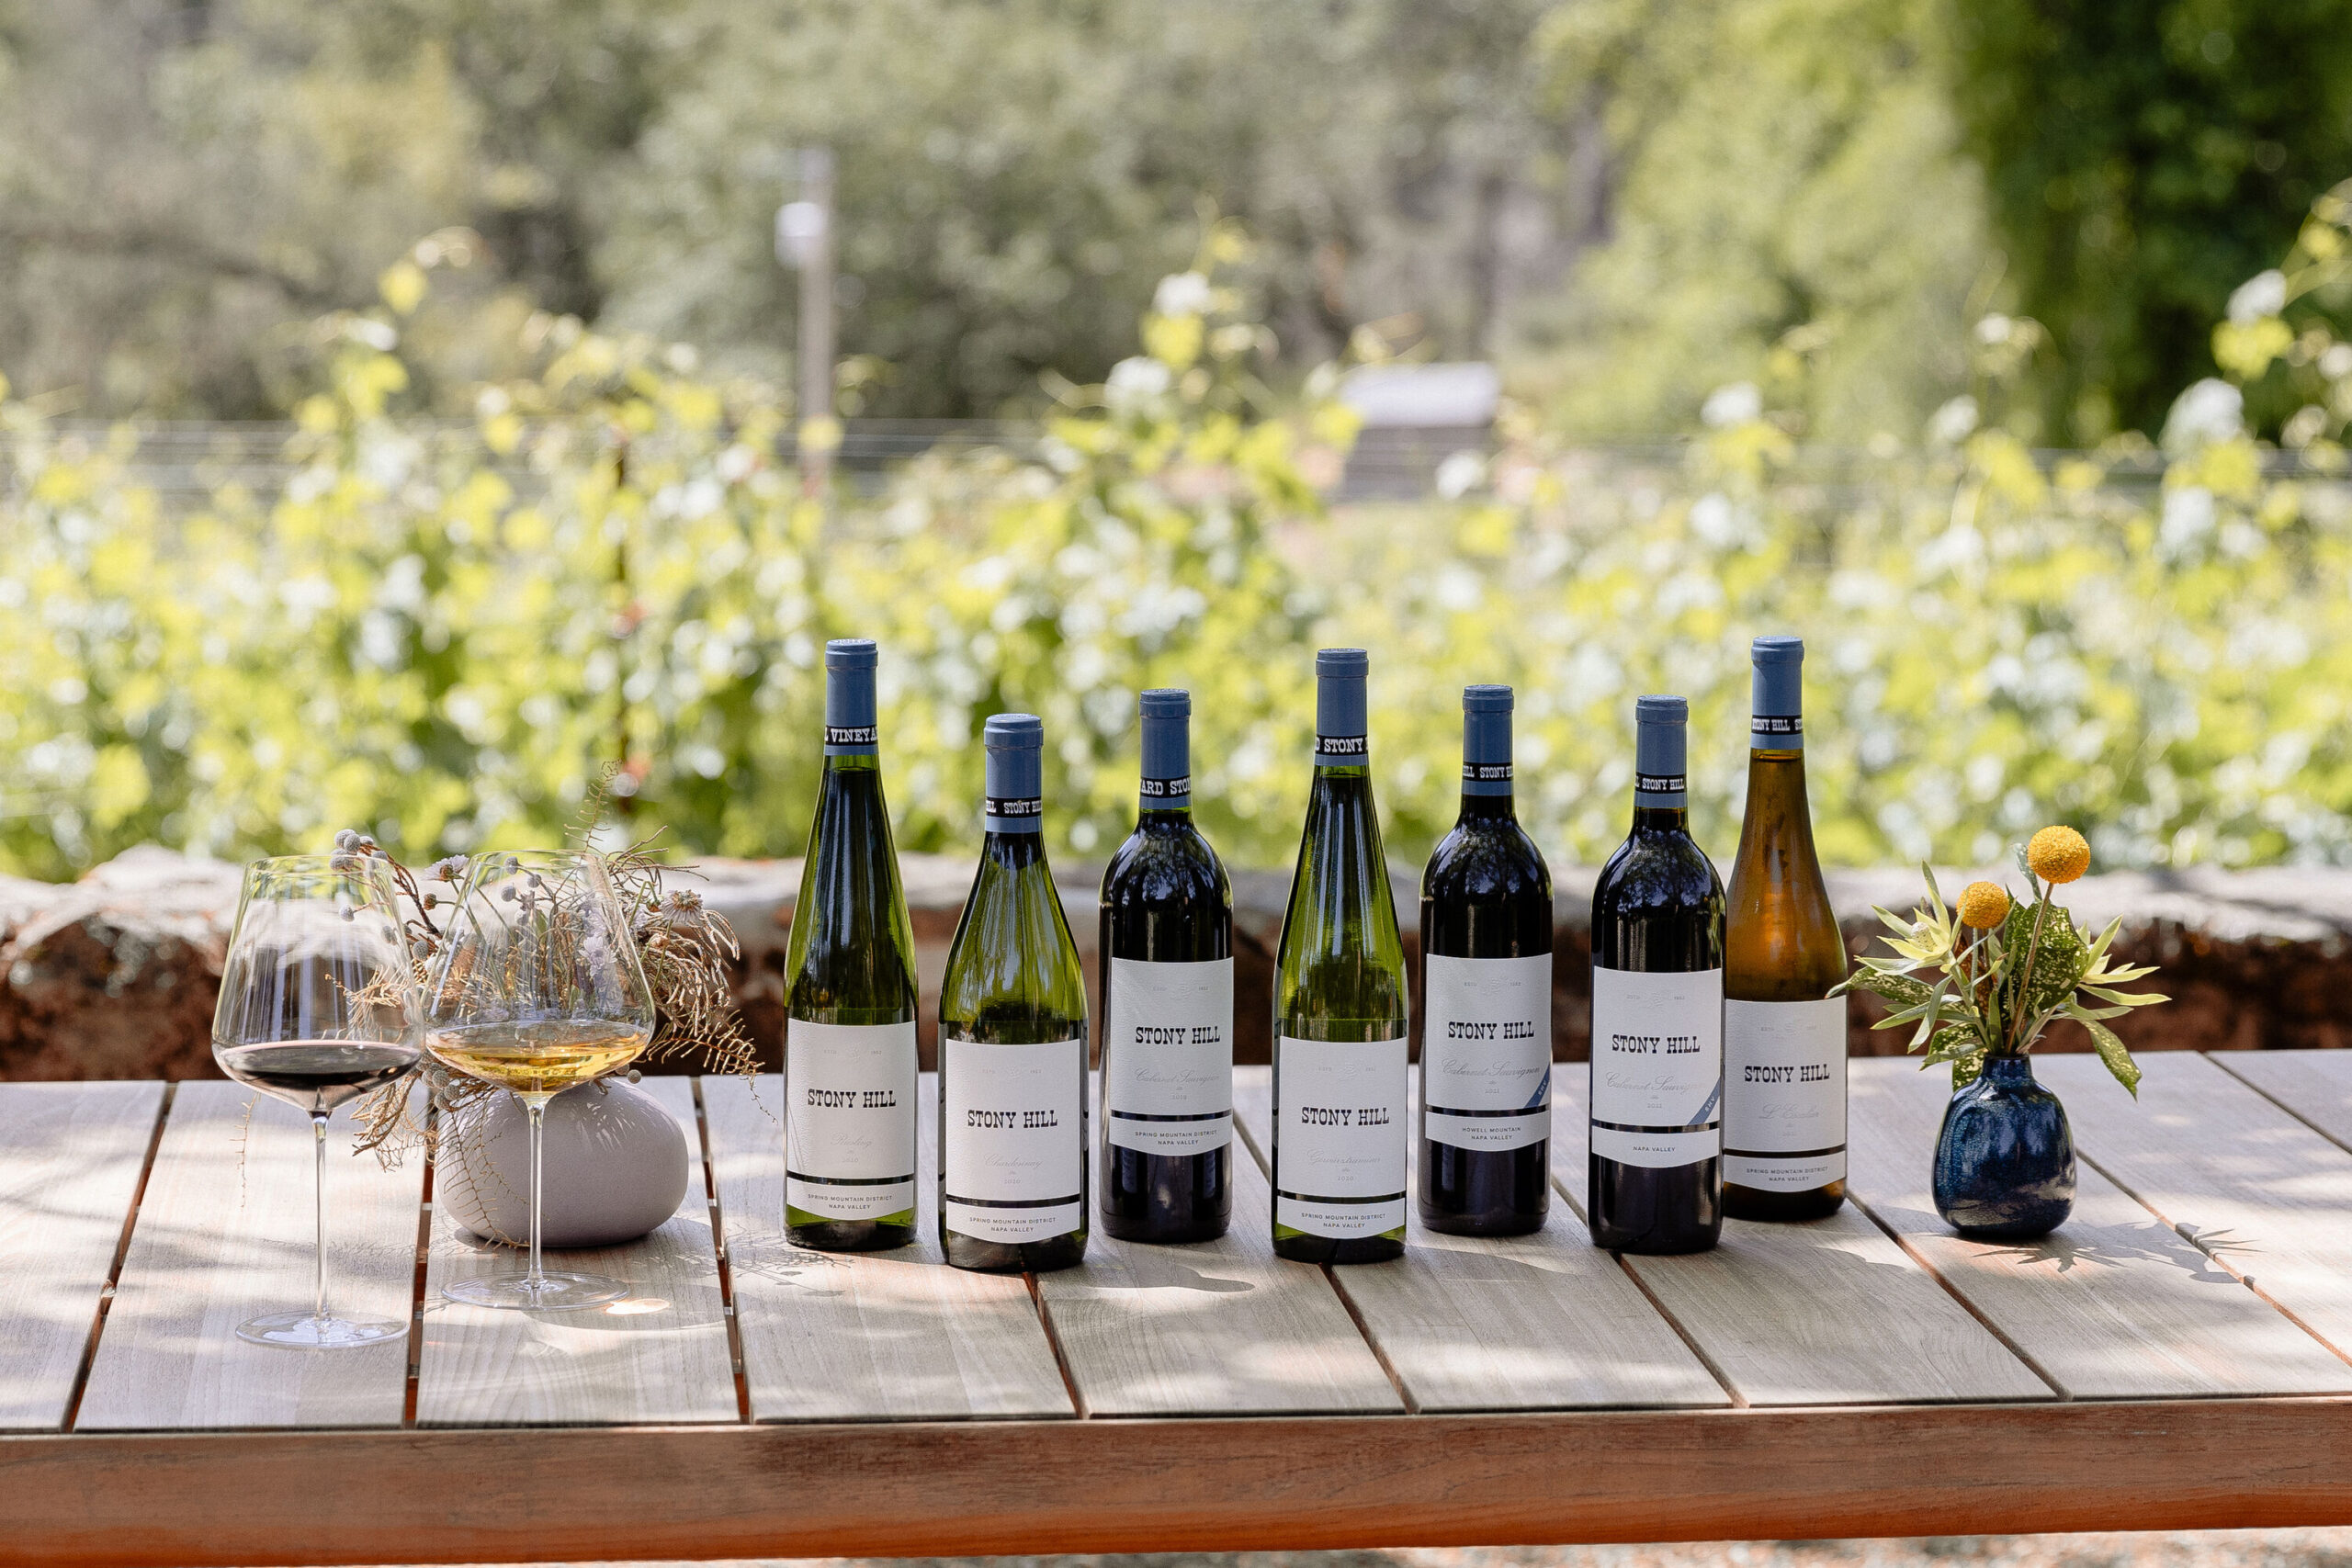 A collection of Stony Hill wines displayed on a table outdoors with two glasses of wine.